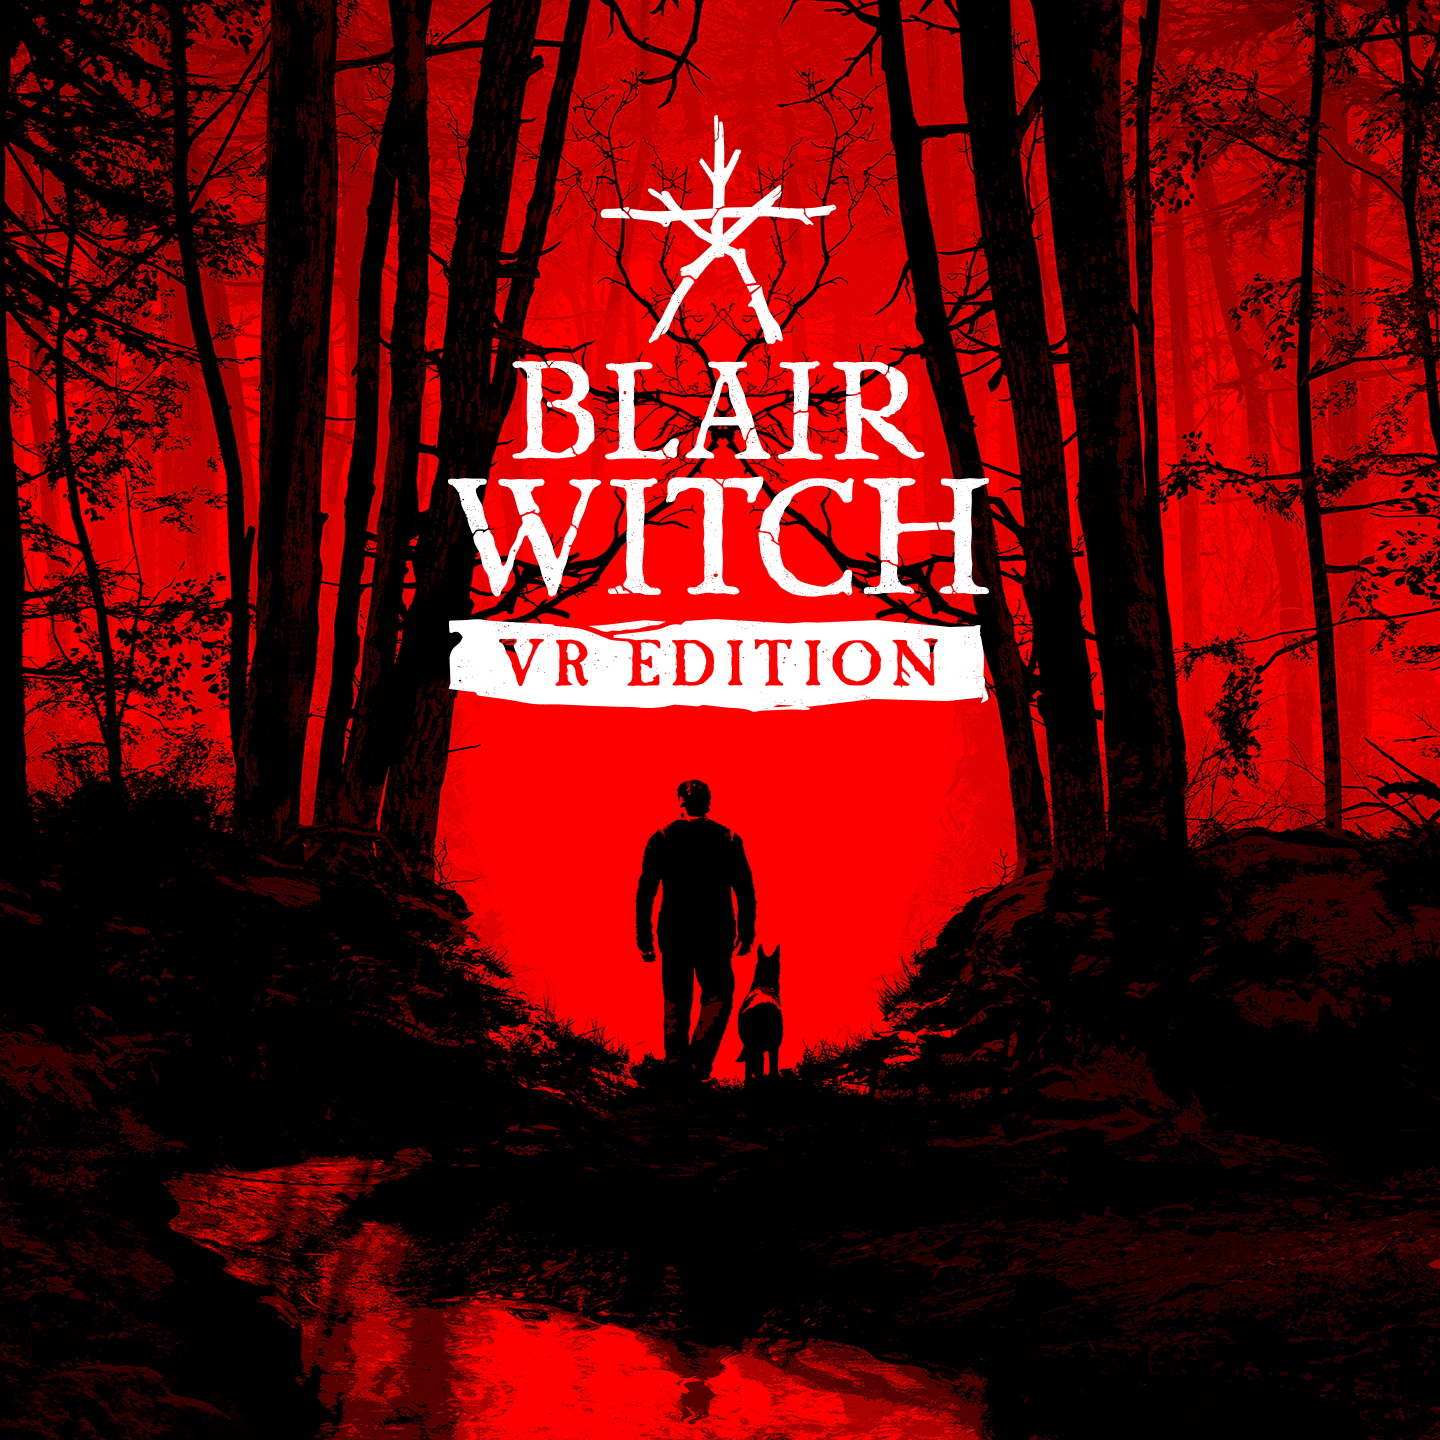 blair witch game